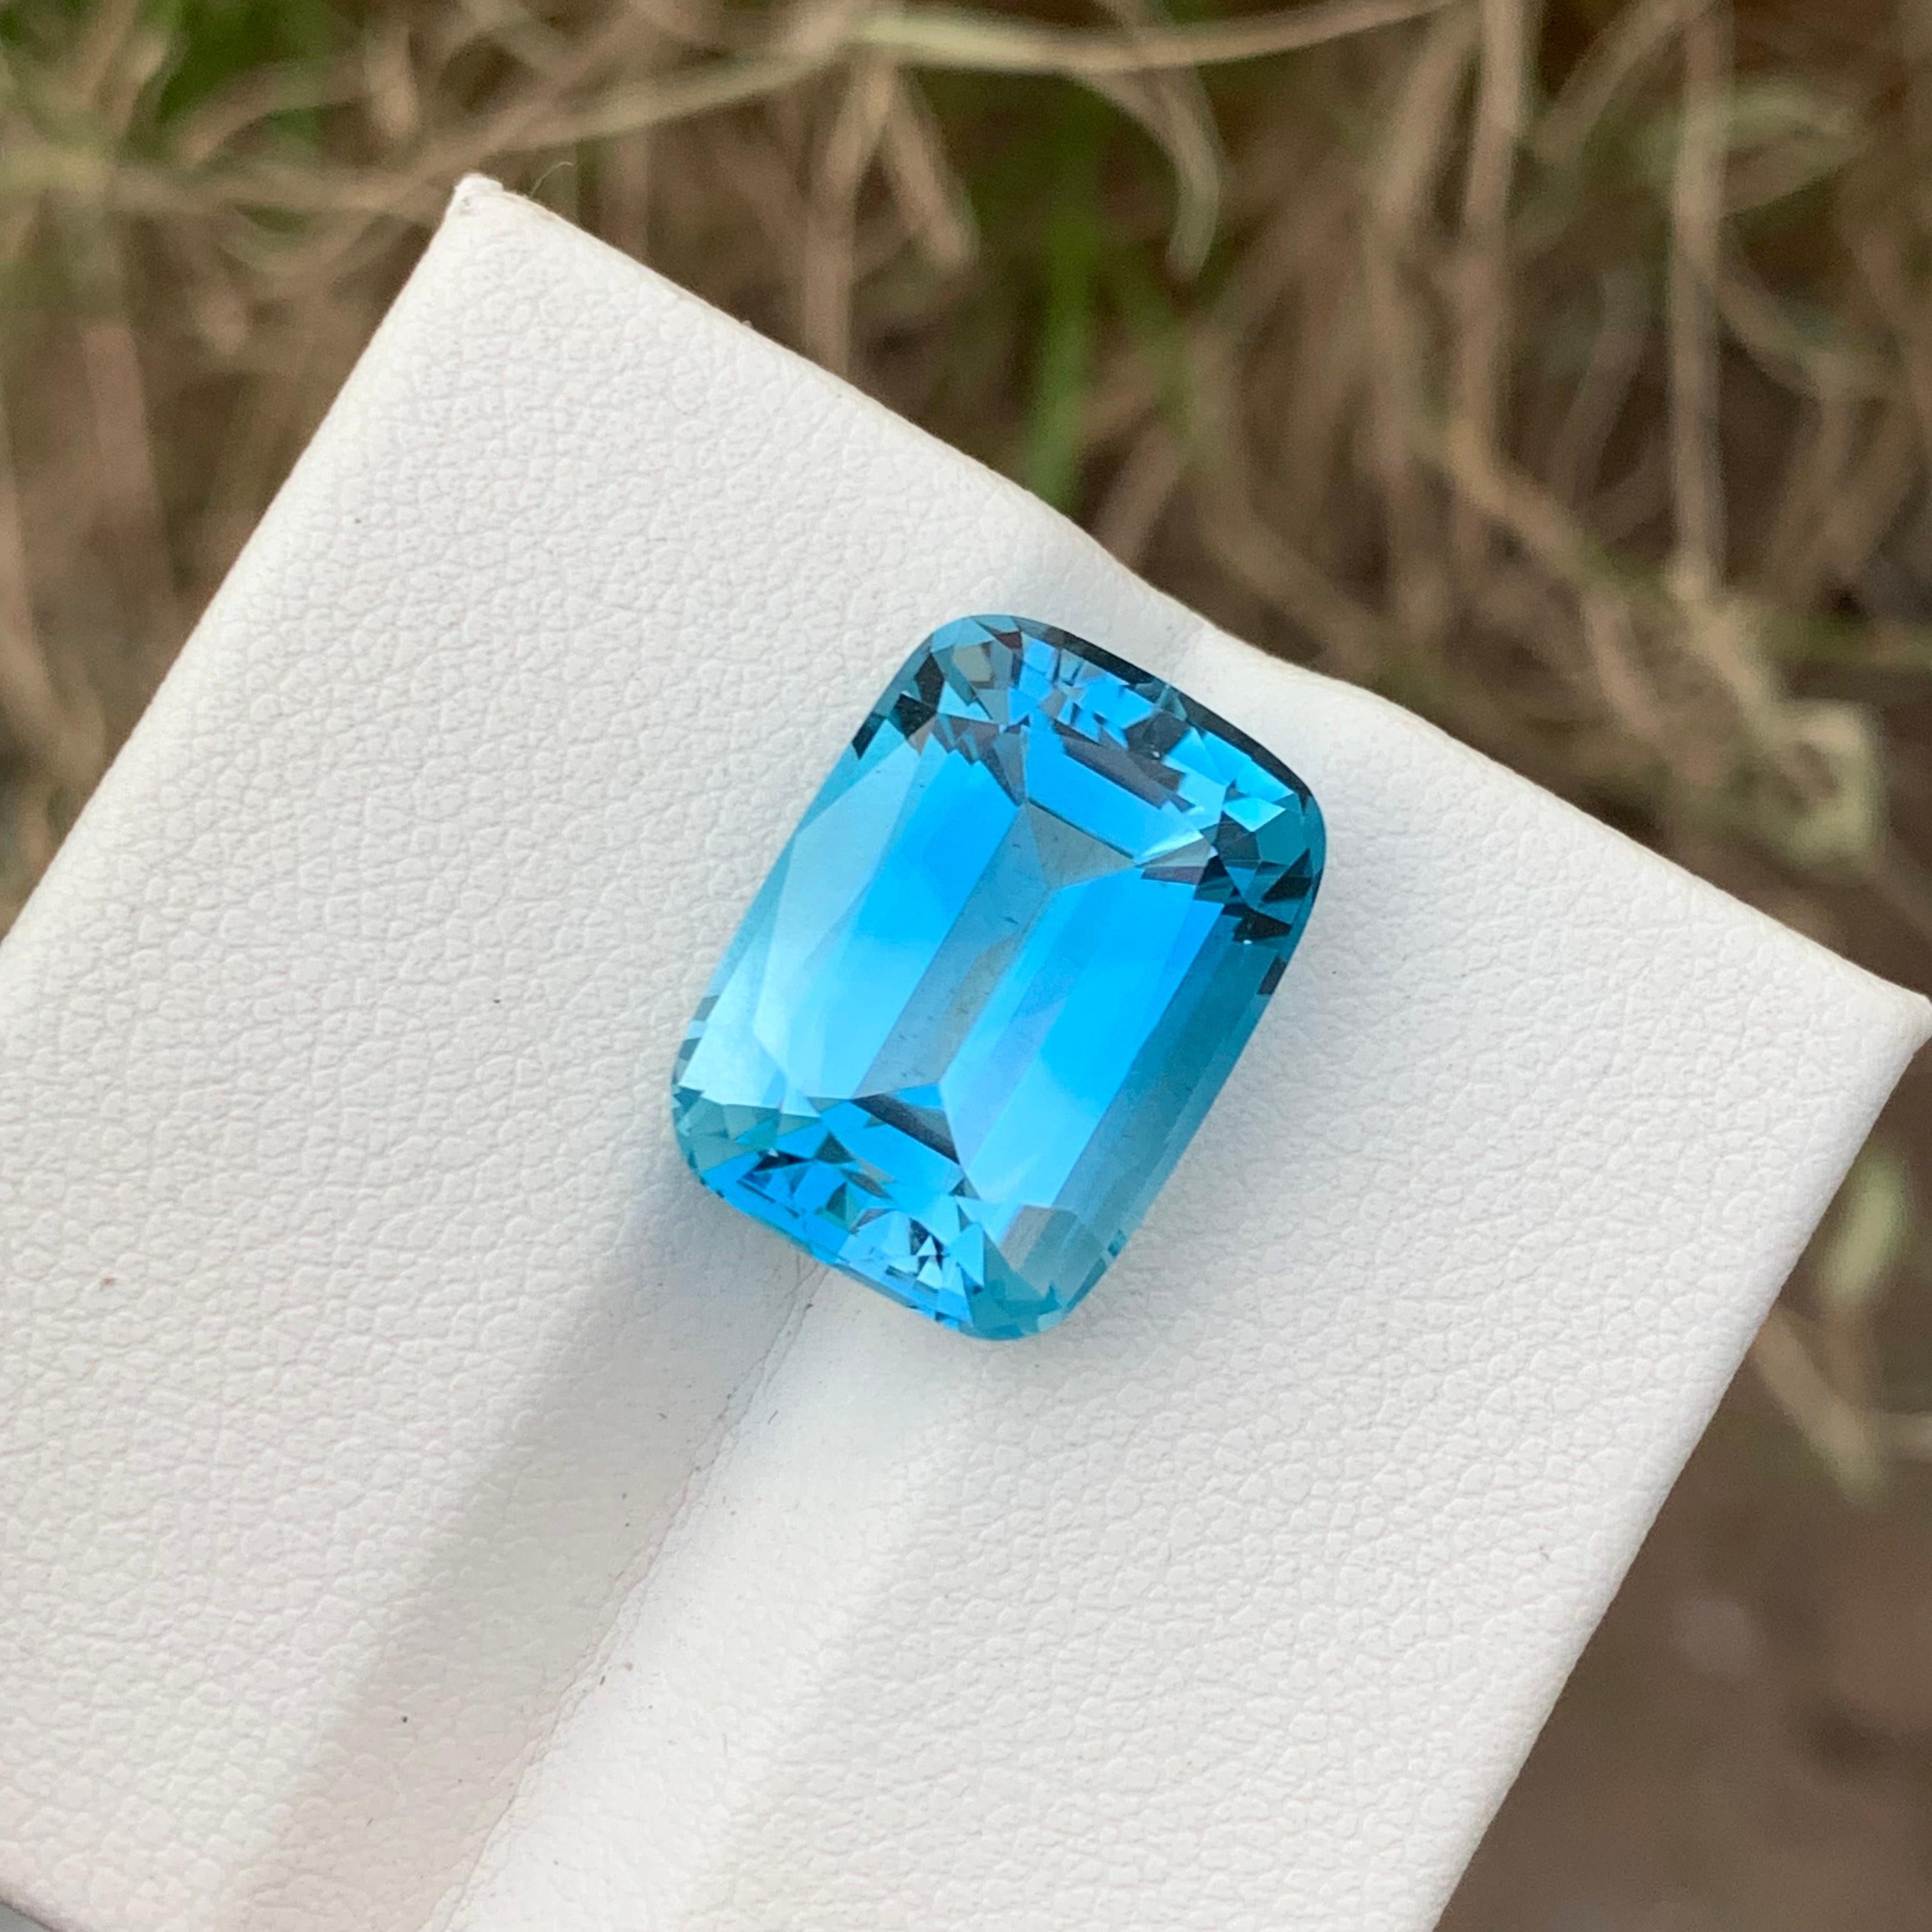 Arts and Crafts Gorgeous 14.95 Cts Faceted Blue Topaz Gemstone Long Cushion Cut From Brazil Mine For Sale